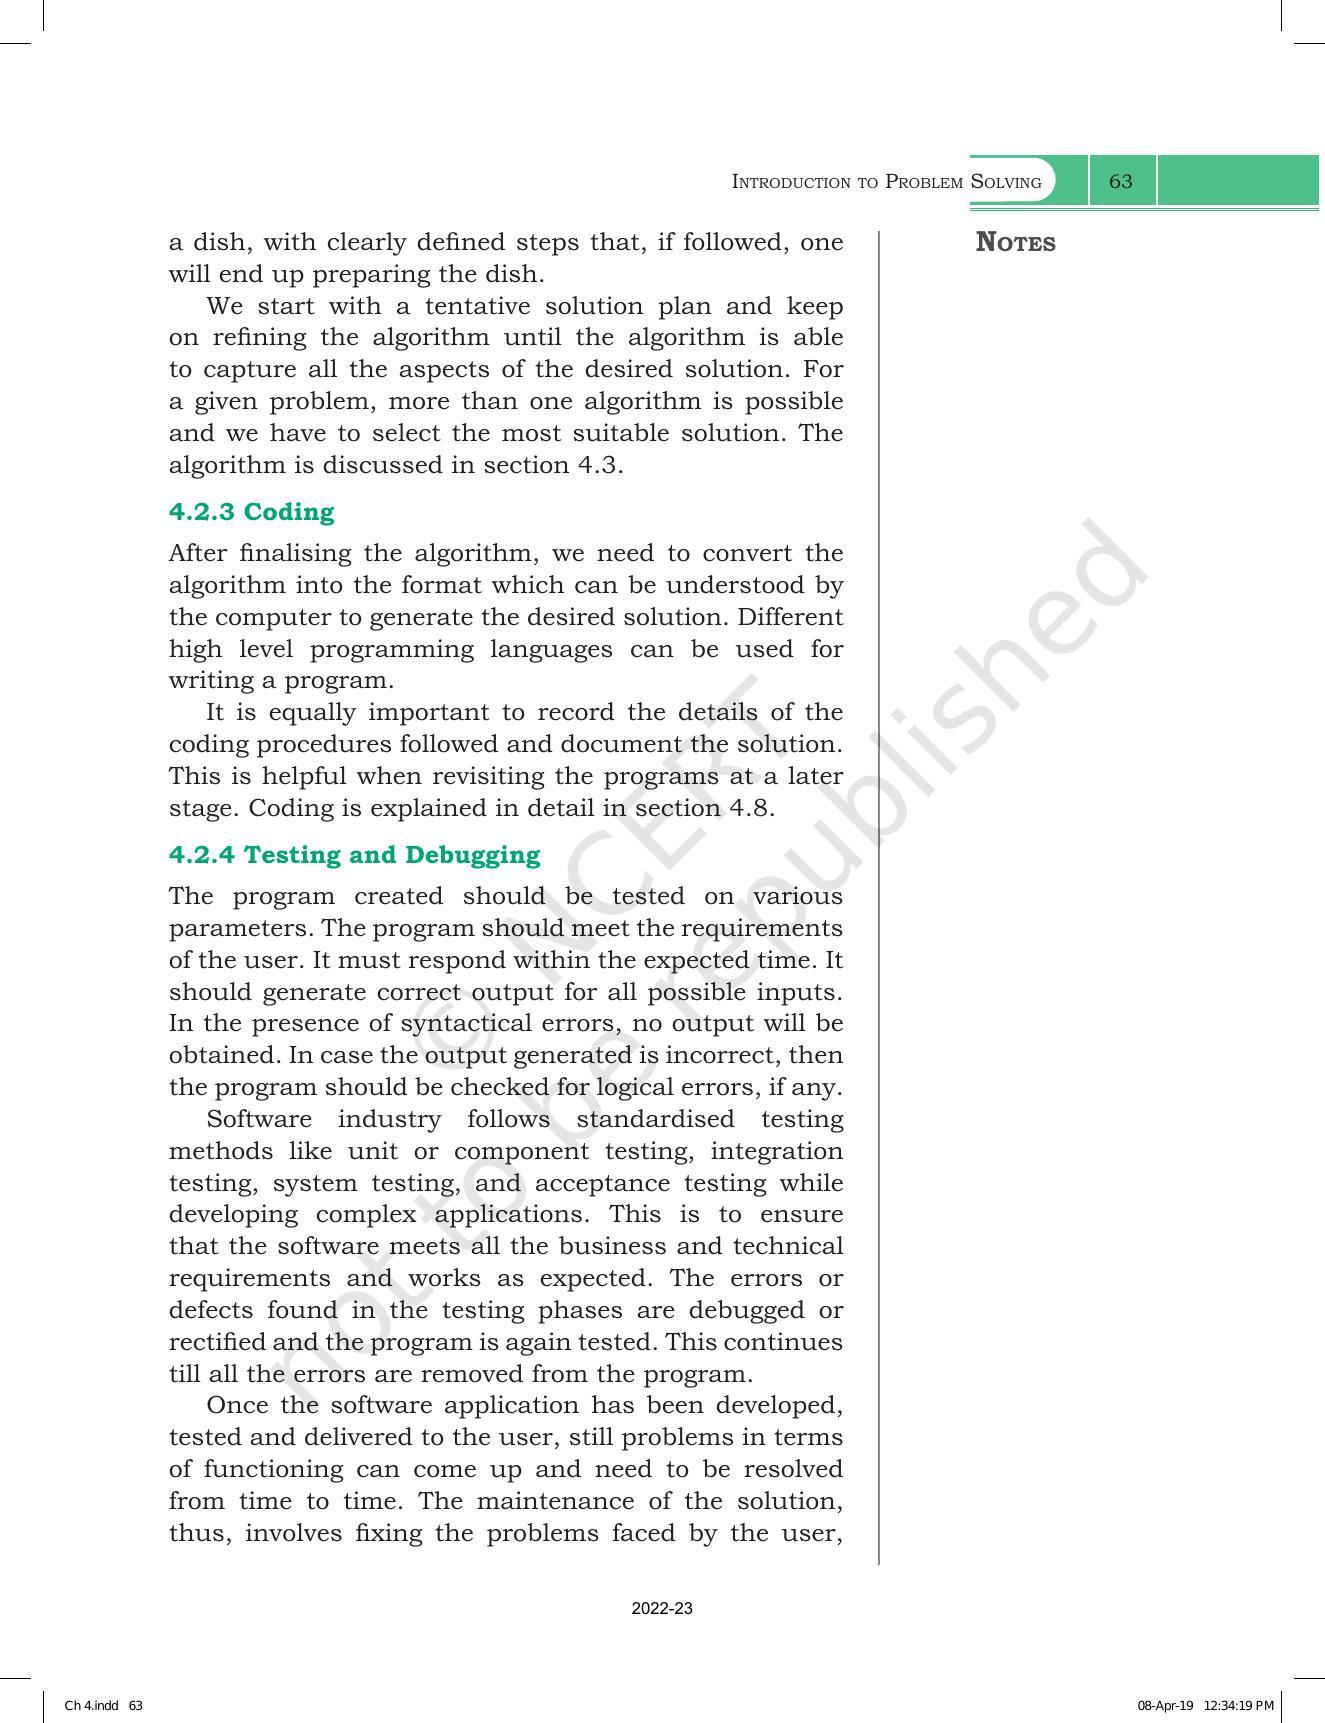 NCERT Book for Class 11 Computer Science Chapter 4 Introduction to Problem-Solving - Page 3